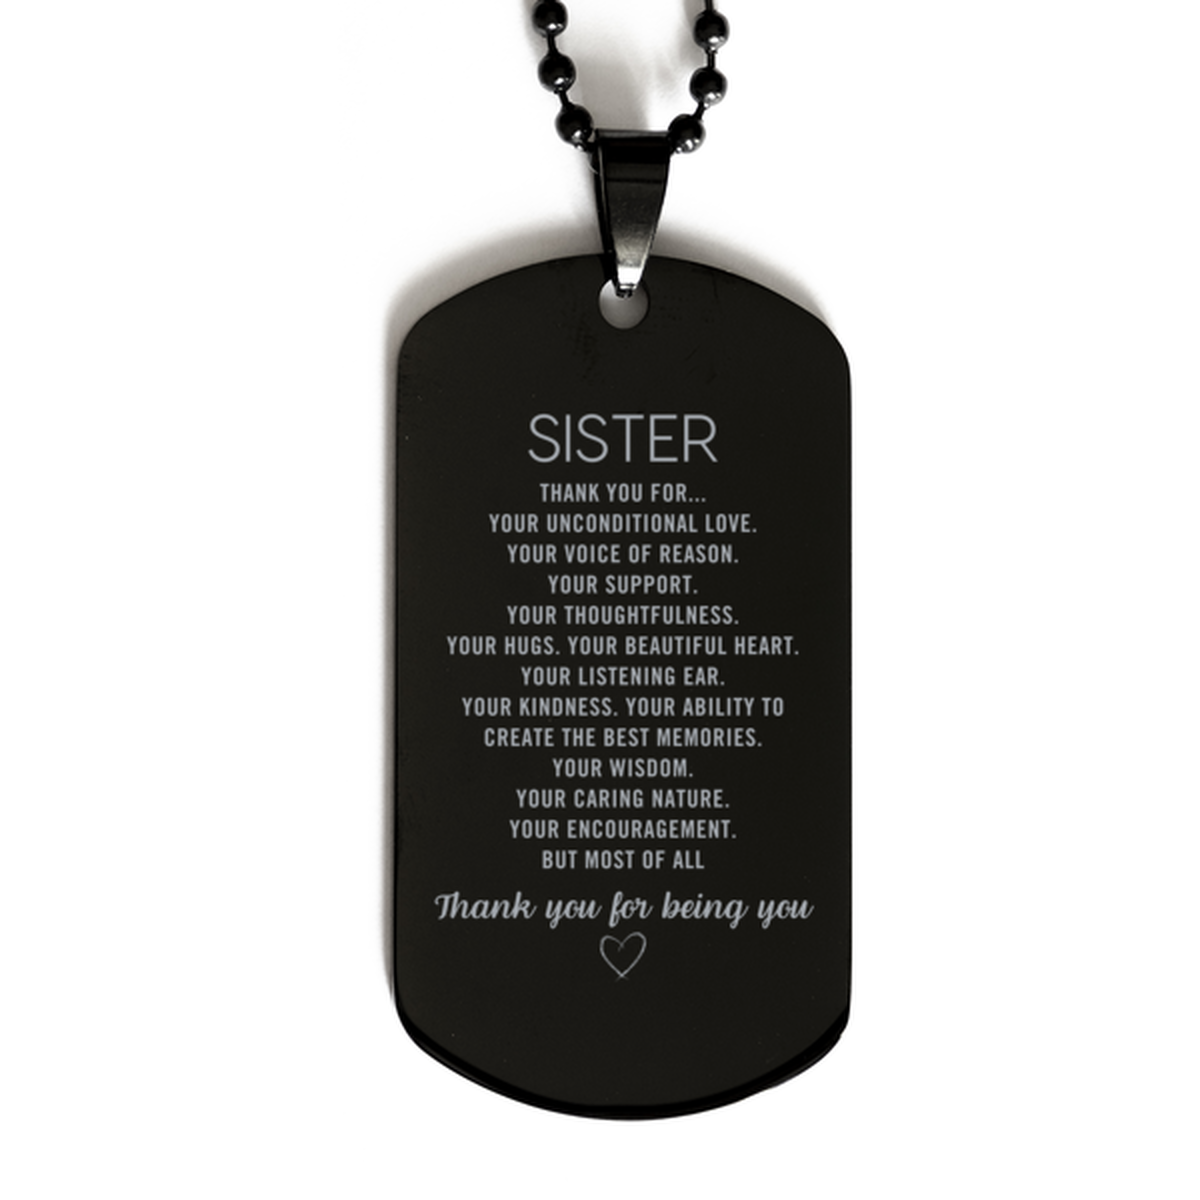 Sister Black Dog Tag Custom, Engraved Gifts For Sister Christmas Graduation Birthday Gifts for Men Women Sister Thank you for Your unconditional love